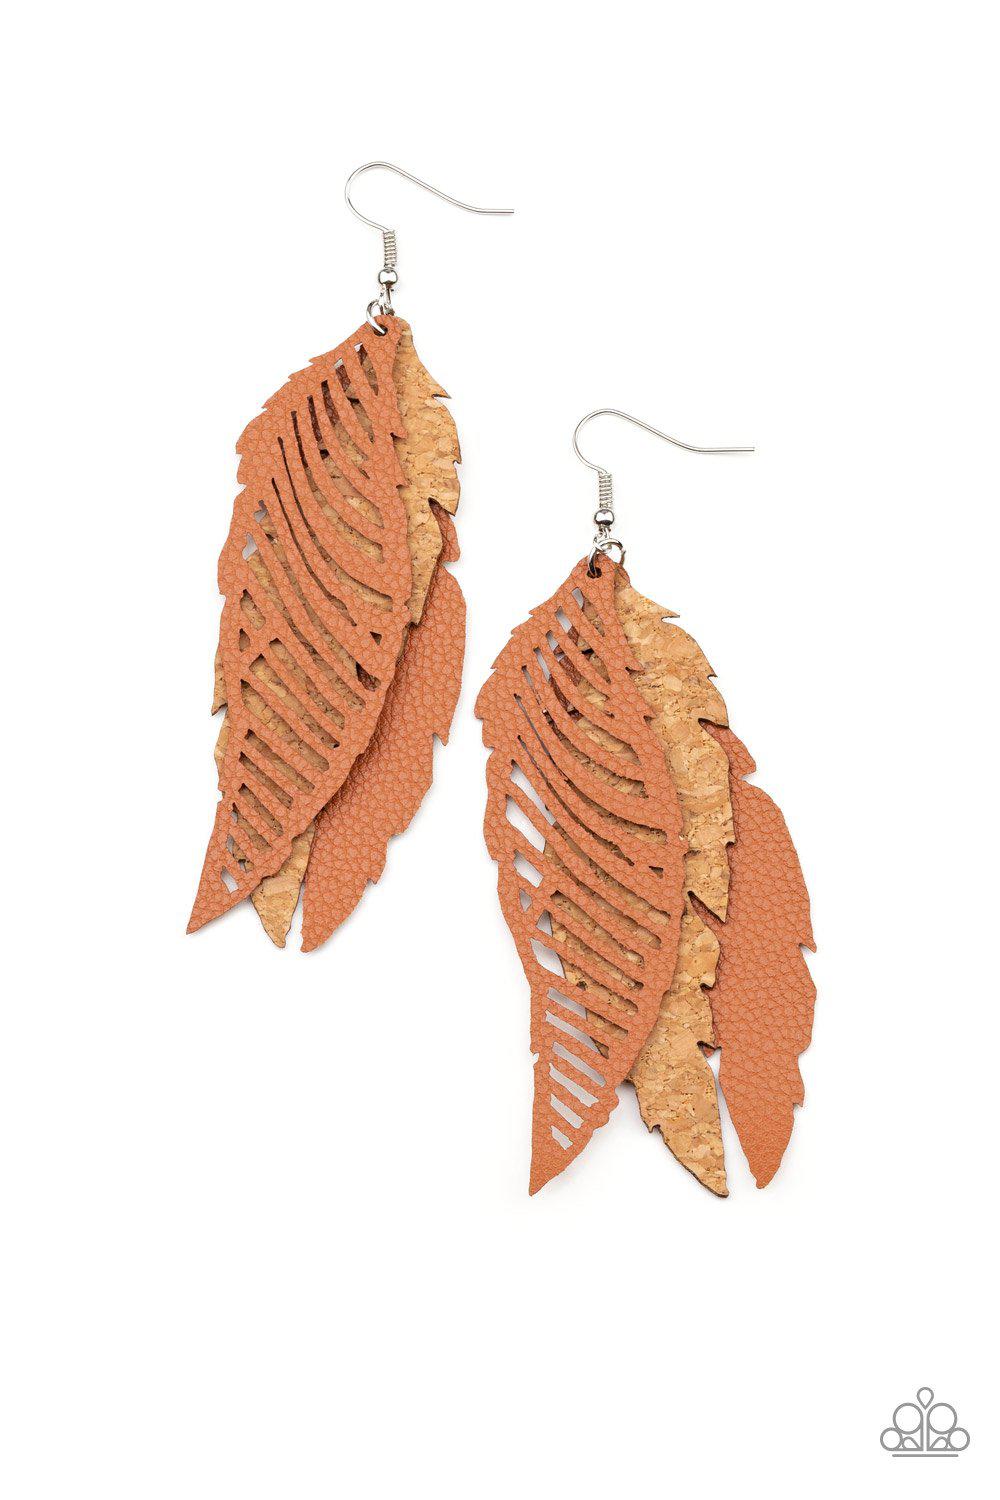 WINGING Off The Hook Brown Leather and Cork Feather Earrings - Paparazzi Accessories- lightbox - CarasShop.com - $5 Jewelry by Cara Jewels